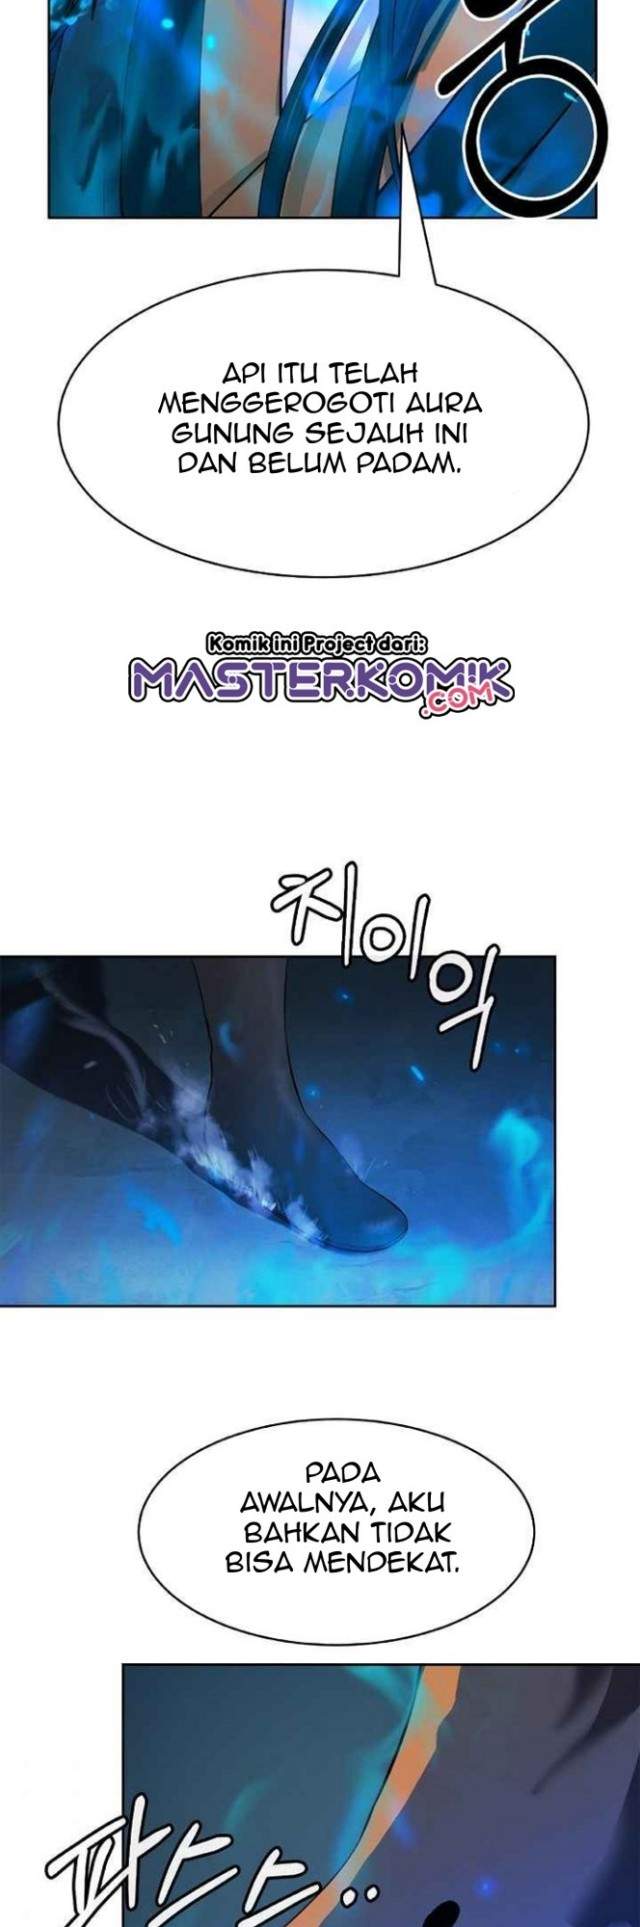 Cystic Story Chapter 19